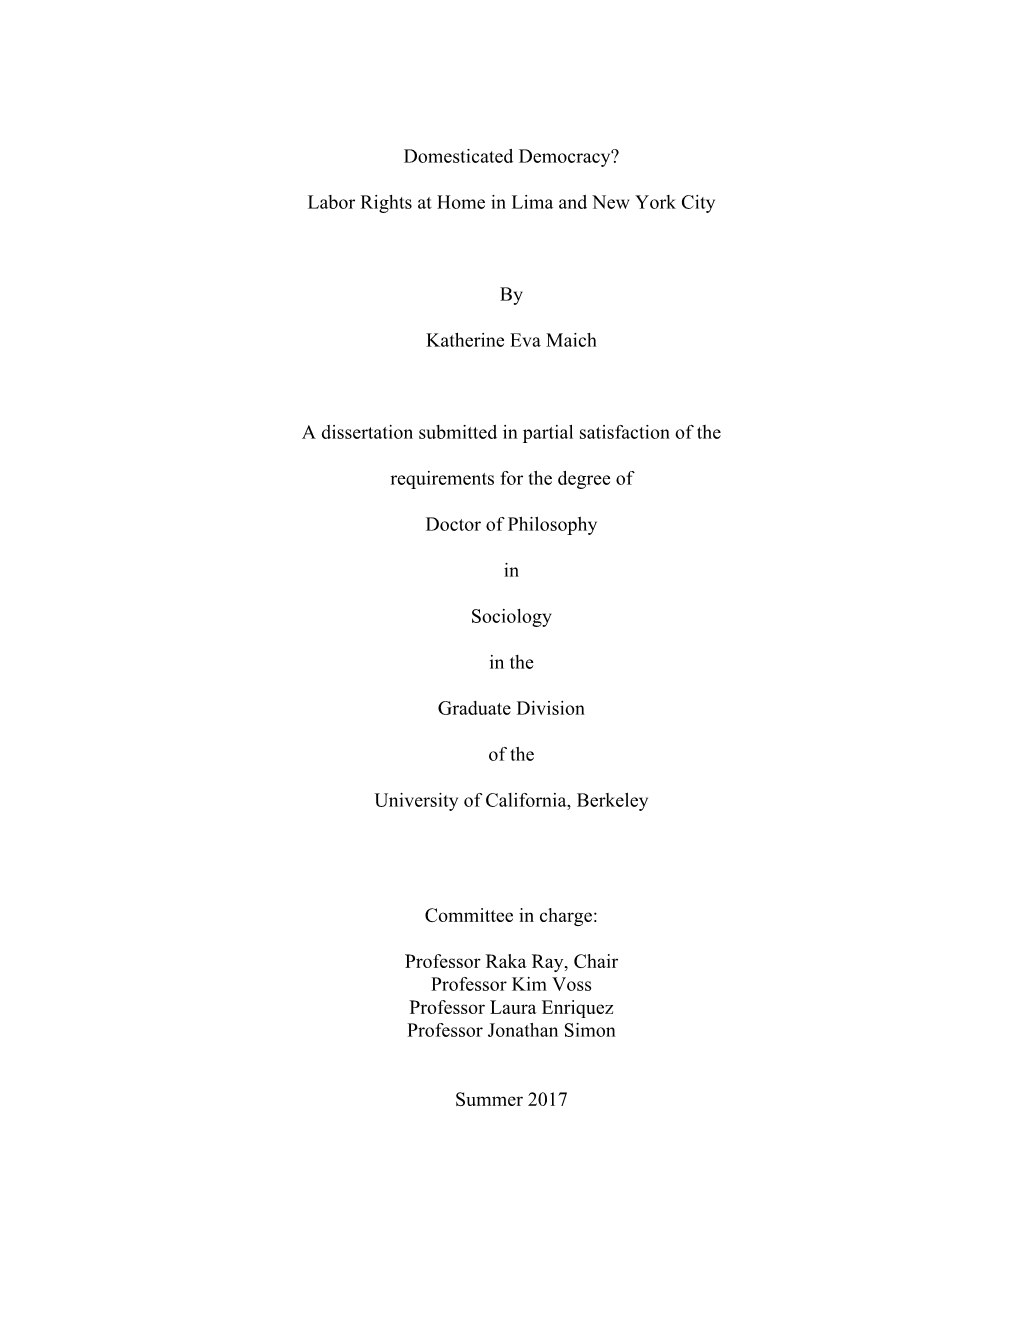 Domesticated Democracy? Labor Rights at Home in Lima and New York City by Katherine Eva Maich a Dissertation Submitted in Partia